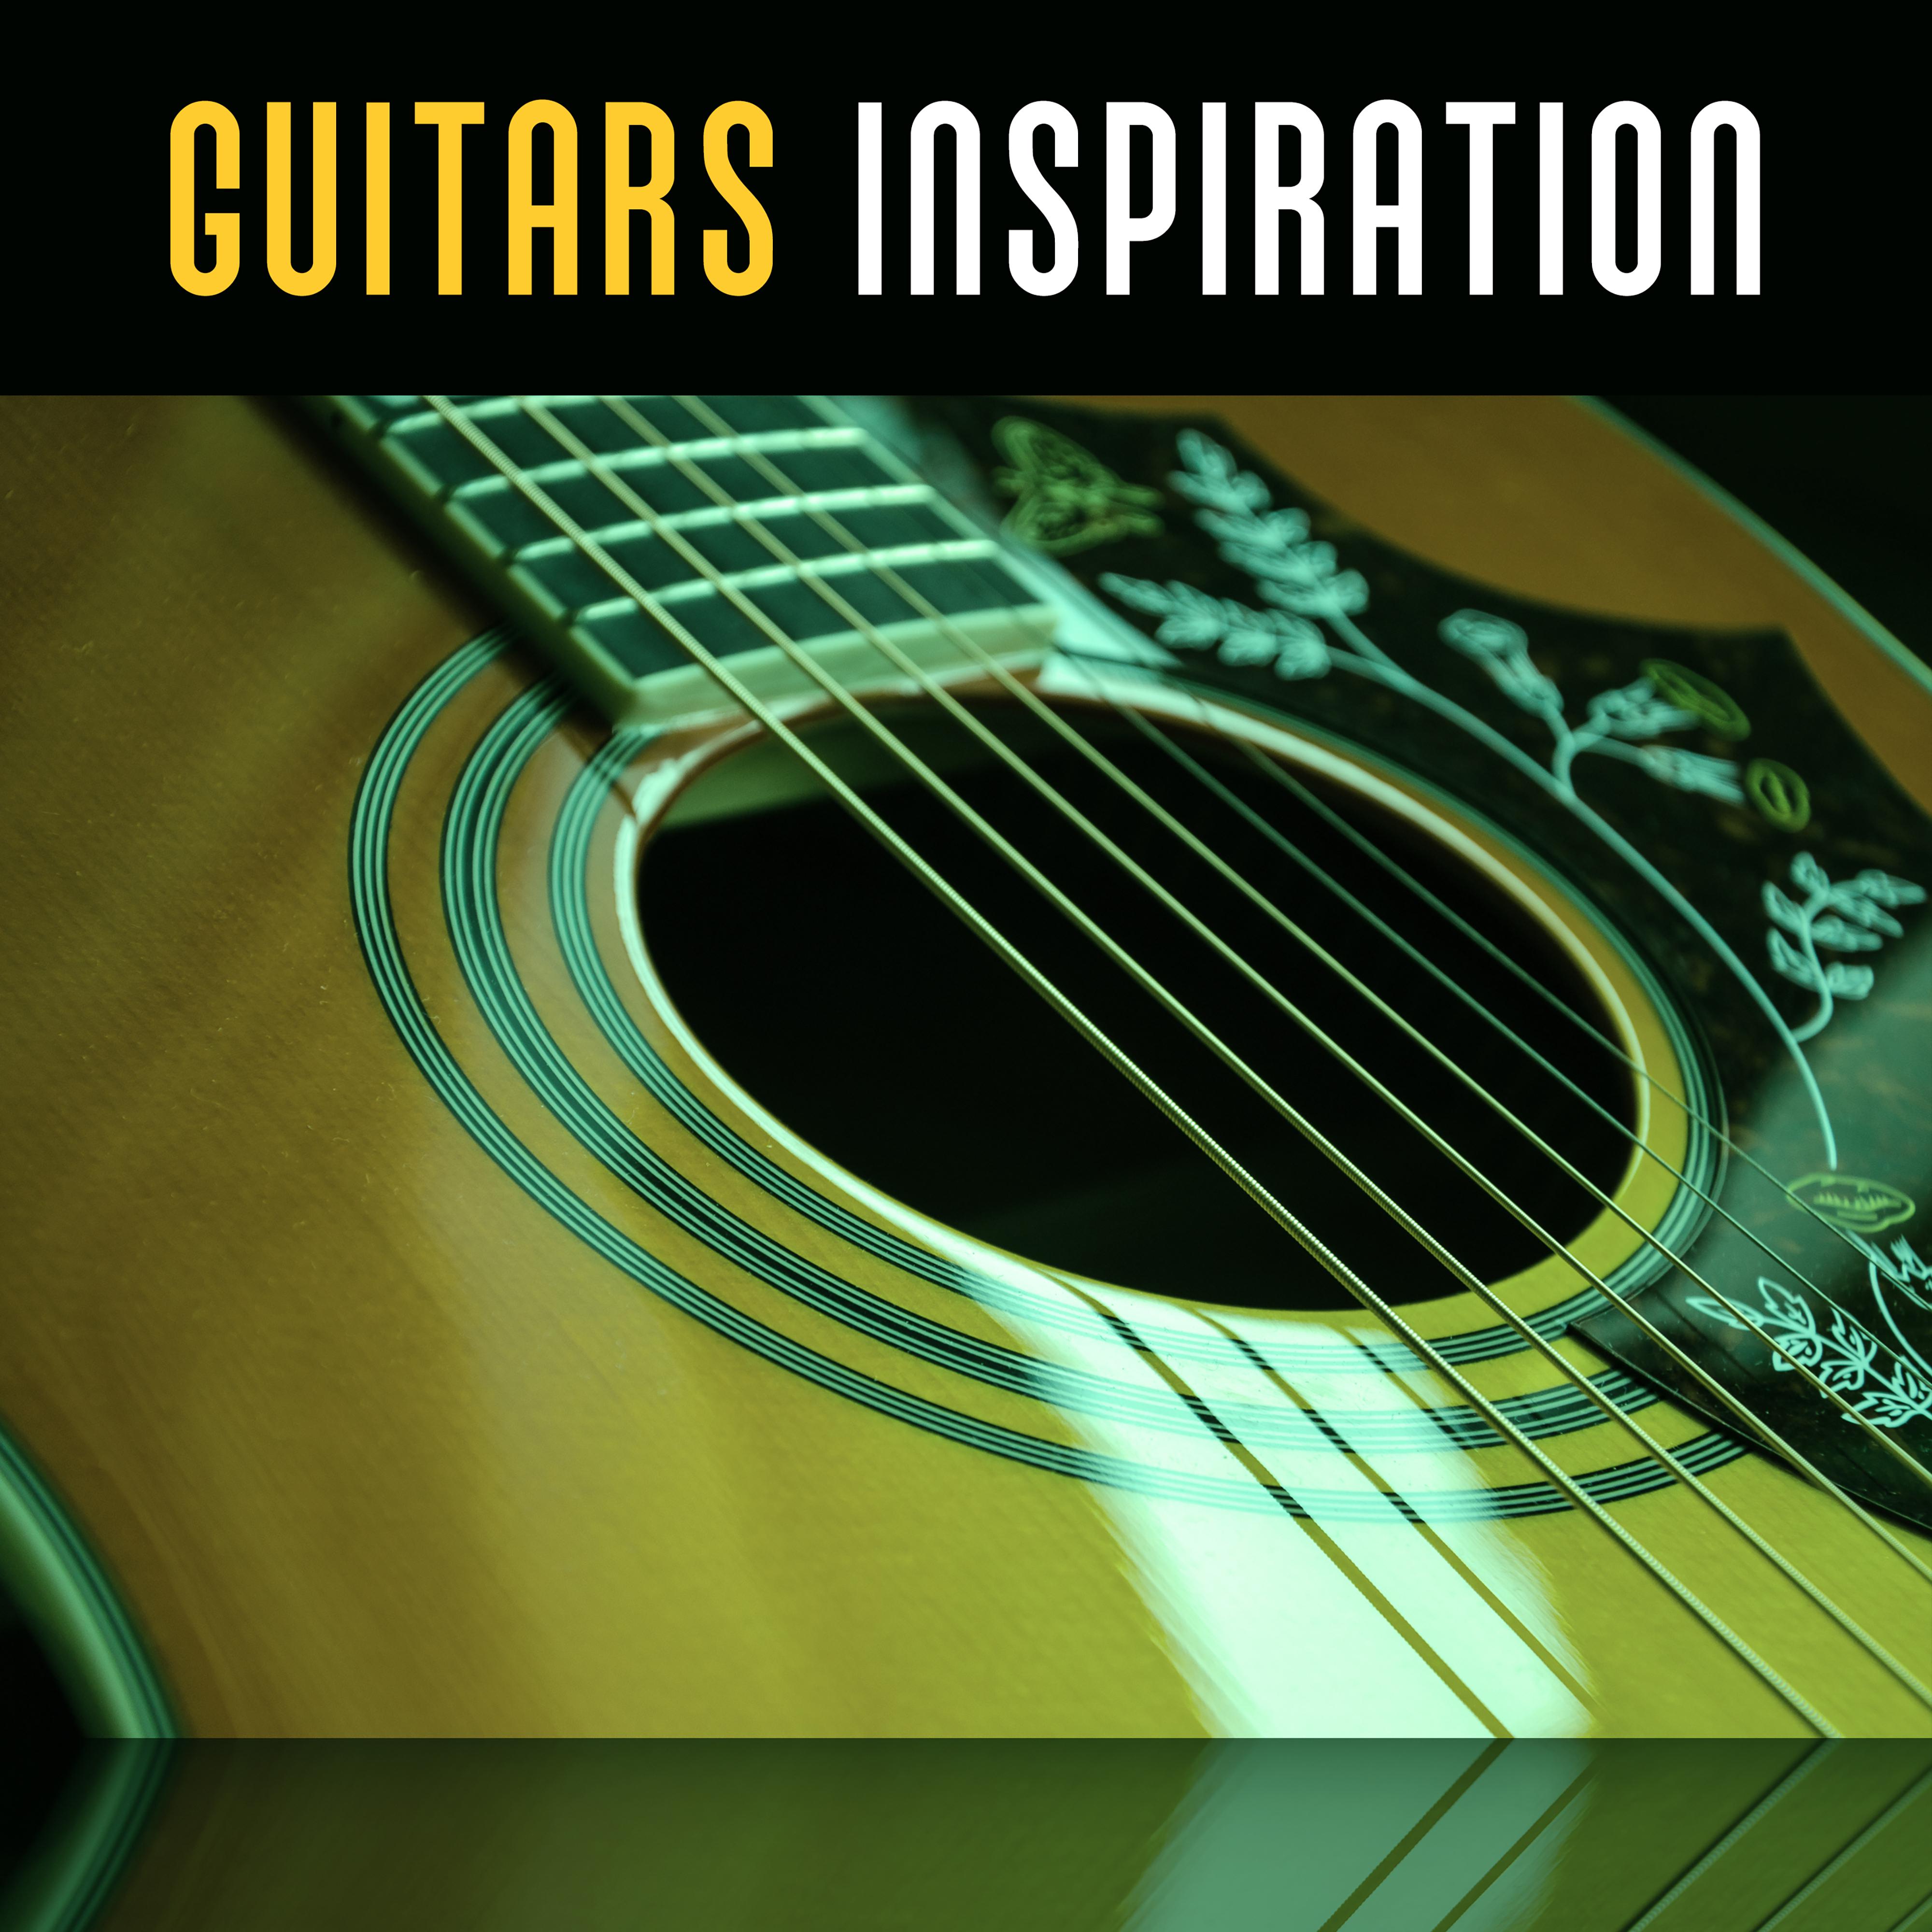 Guitars Inspiration – New Instrumental Music of Guitar Sounds, Ambient Piano & Guitar Music, Chilled Jazz